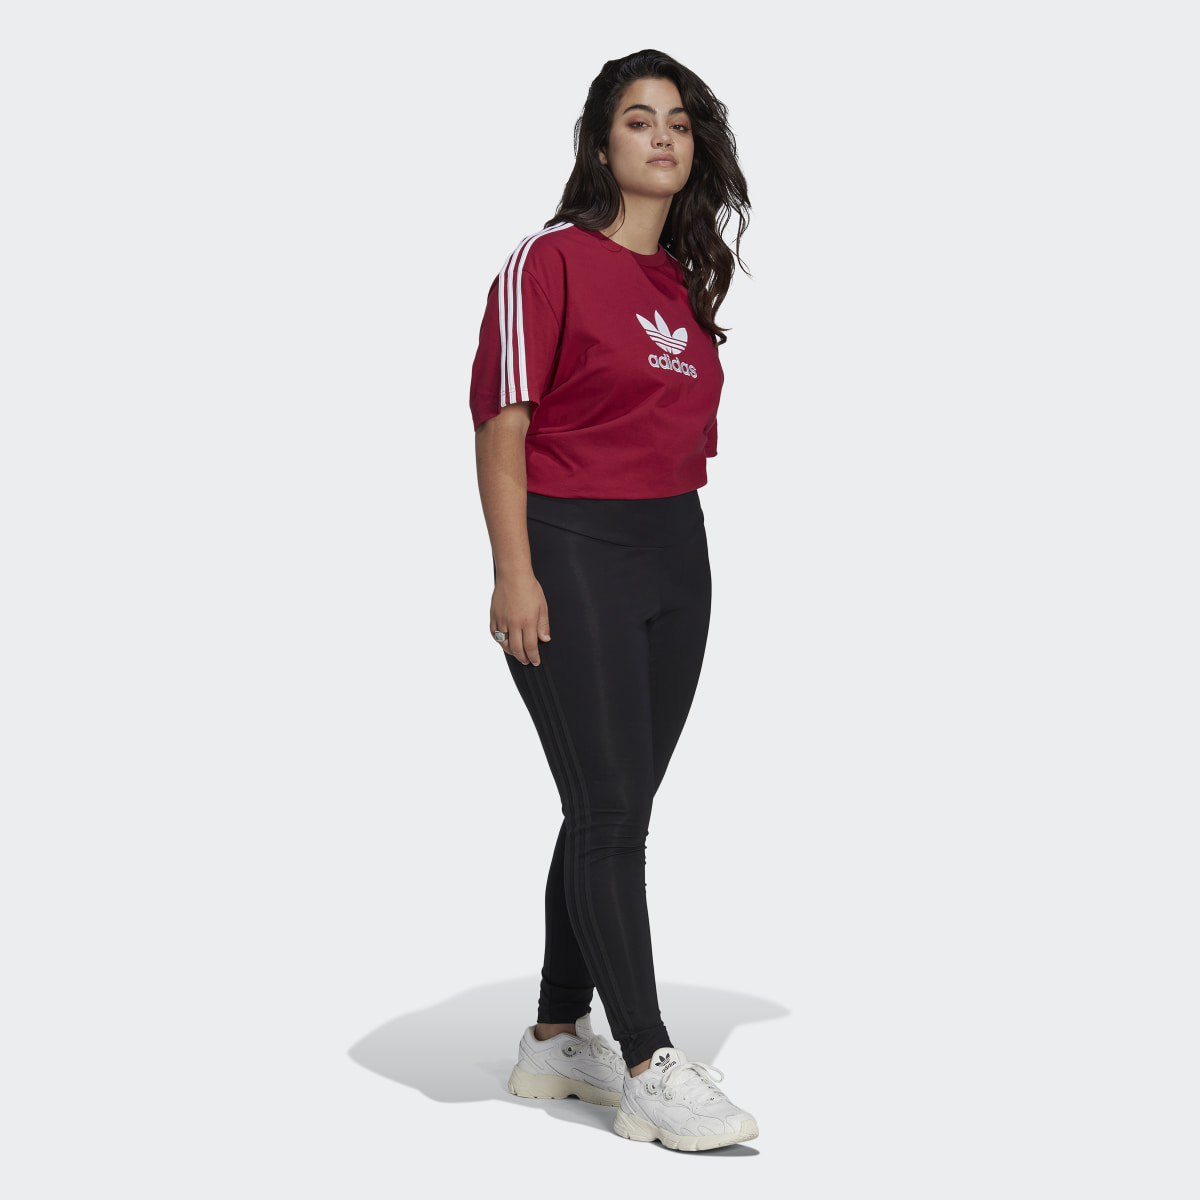 Adidas Centre Stage Tee (Plus Size). 5